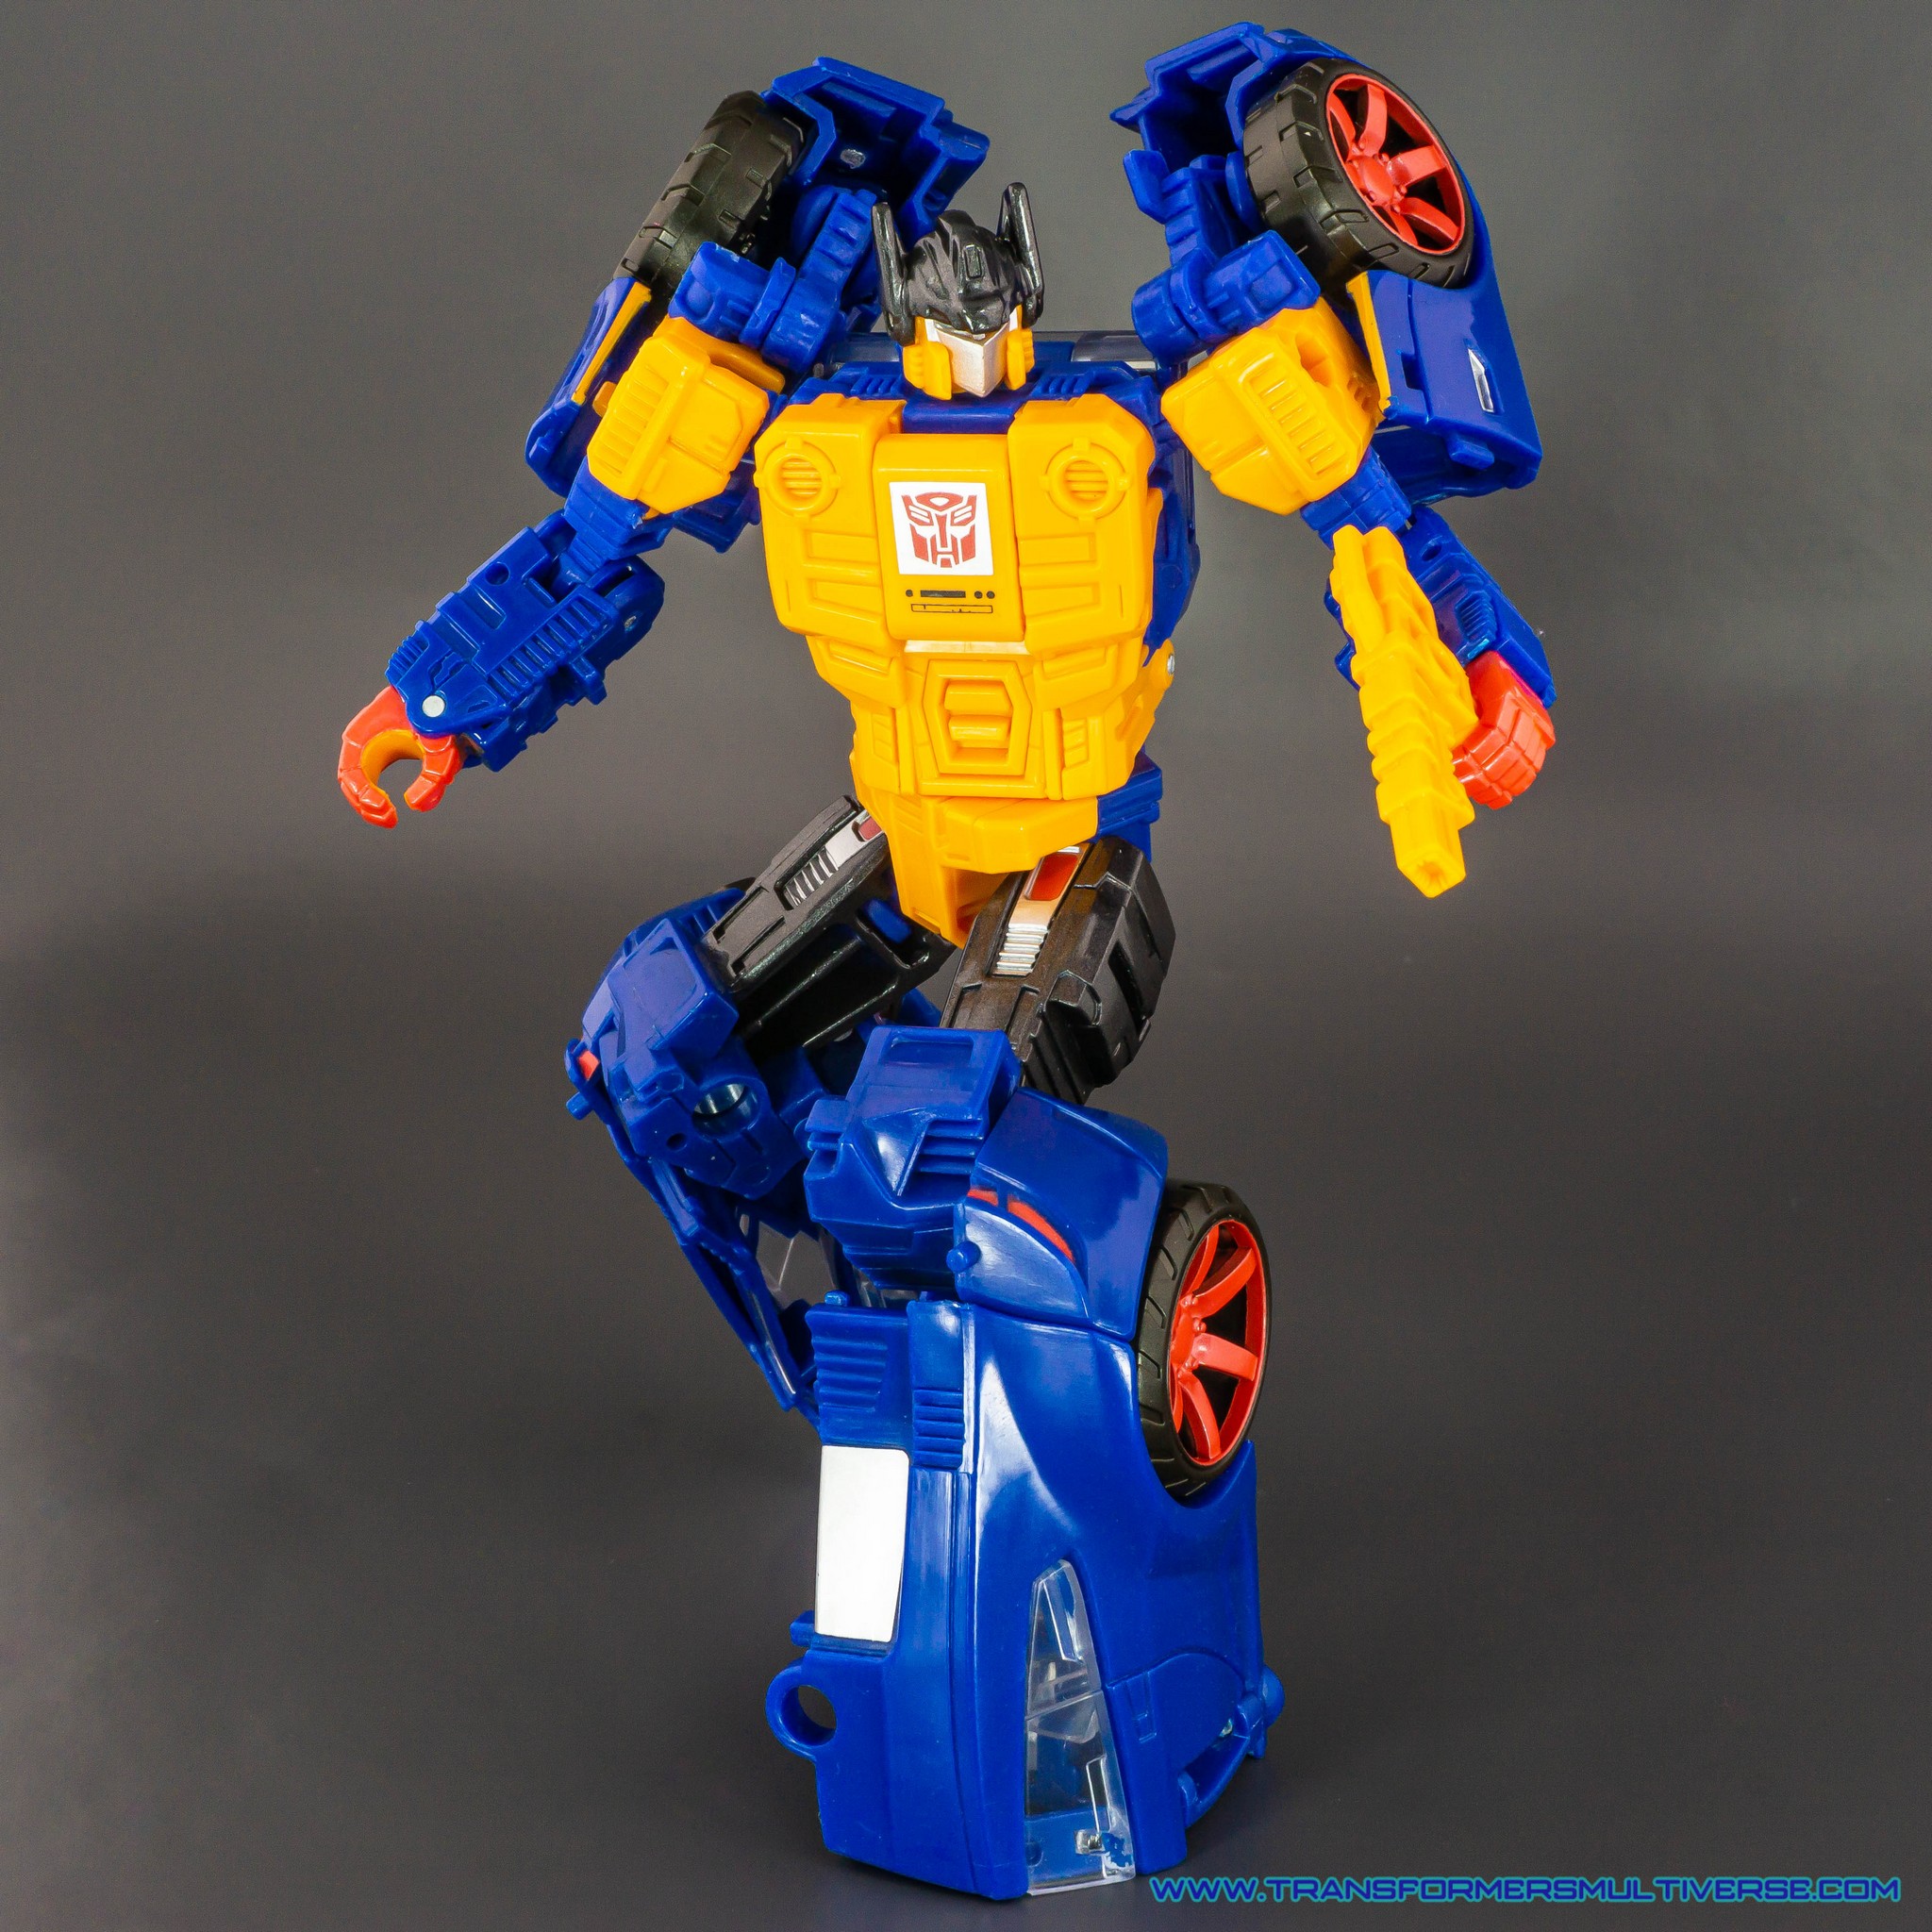 Transformers Power of the Primes Punch robot mode posed